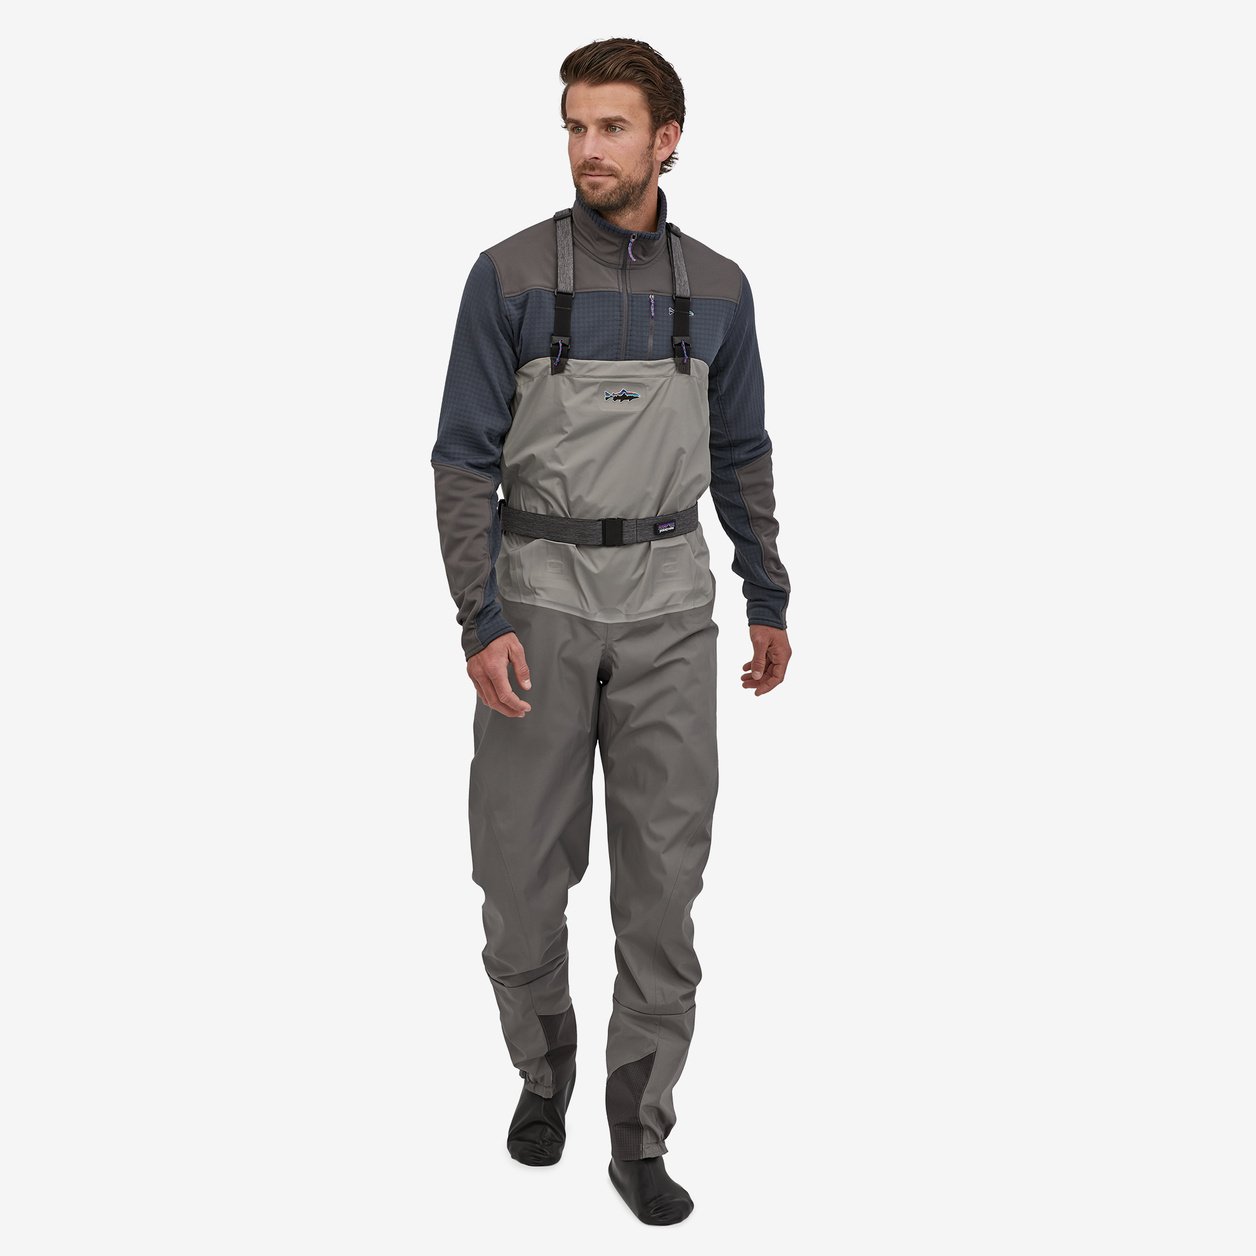 Patagonia Middle Fork Wader Review - Telluride Angler